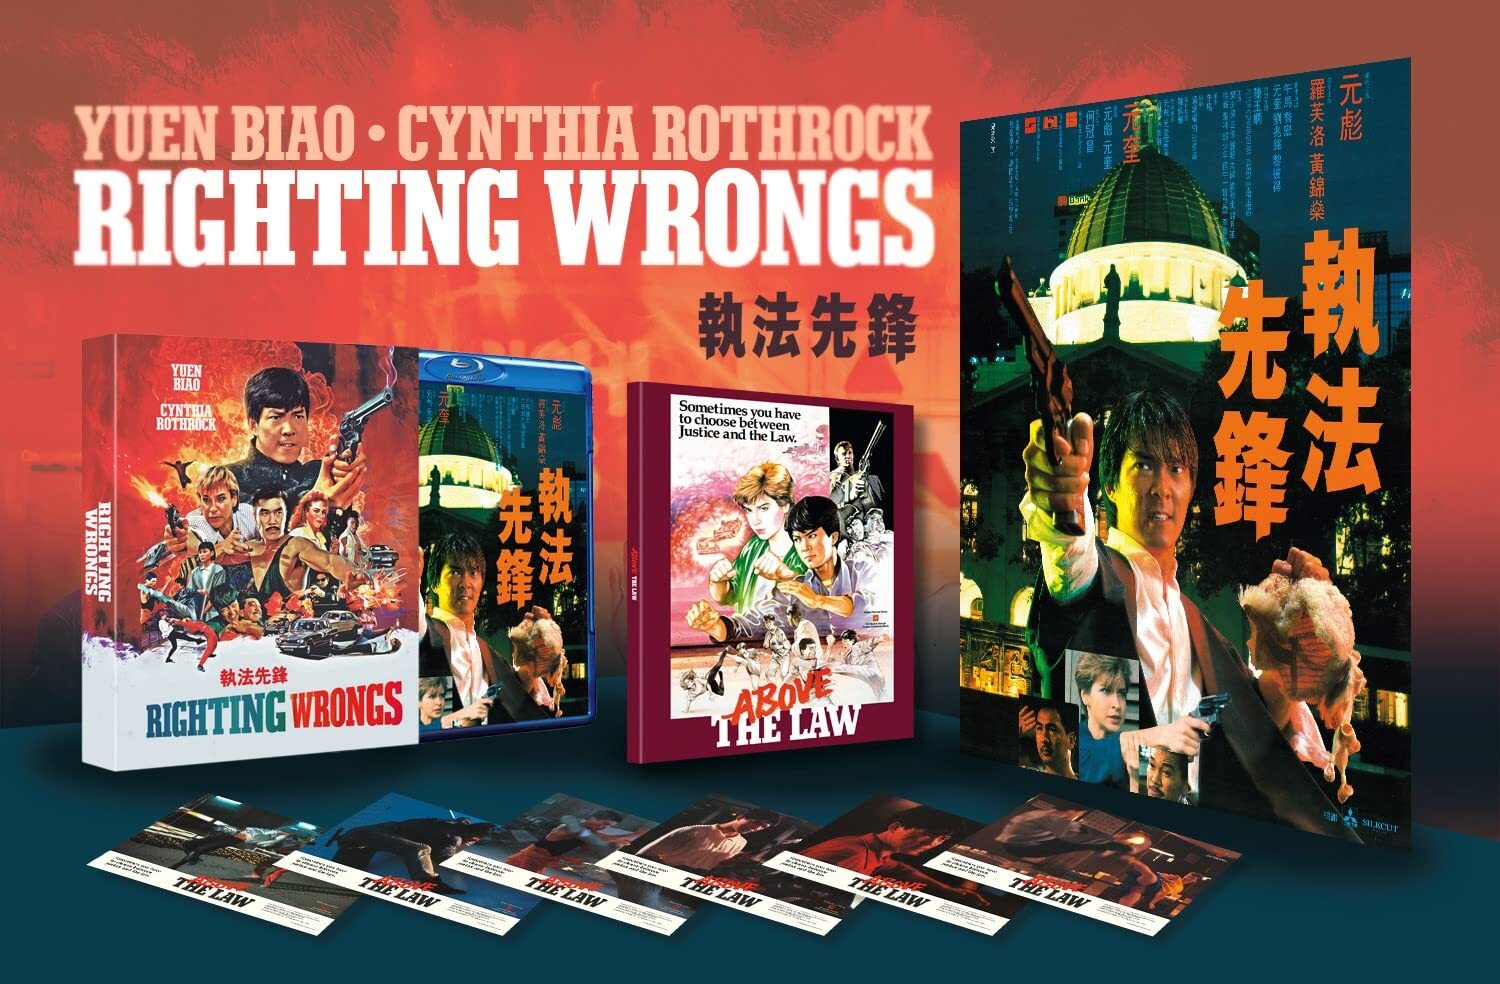 RIGHTING WRONGS (REGION B IMPORT - LIMITED EDITION) BLU-RAY